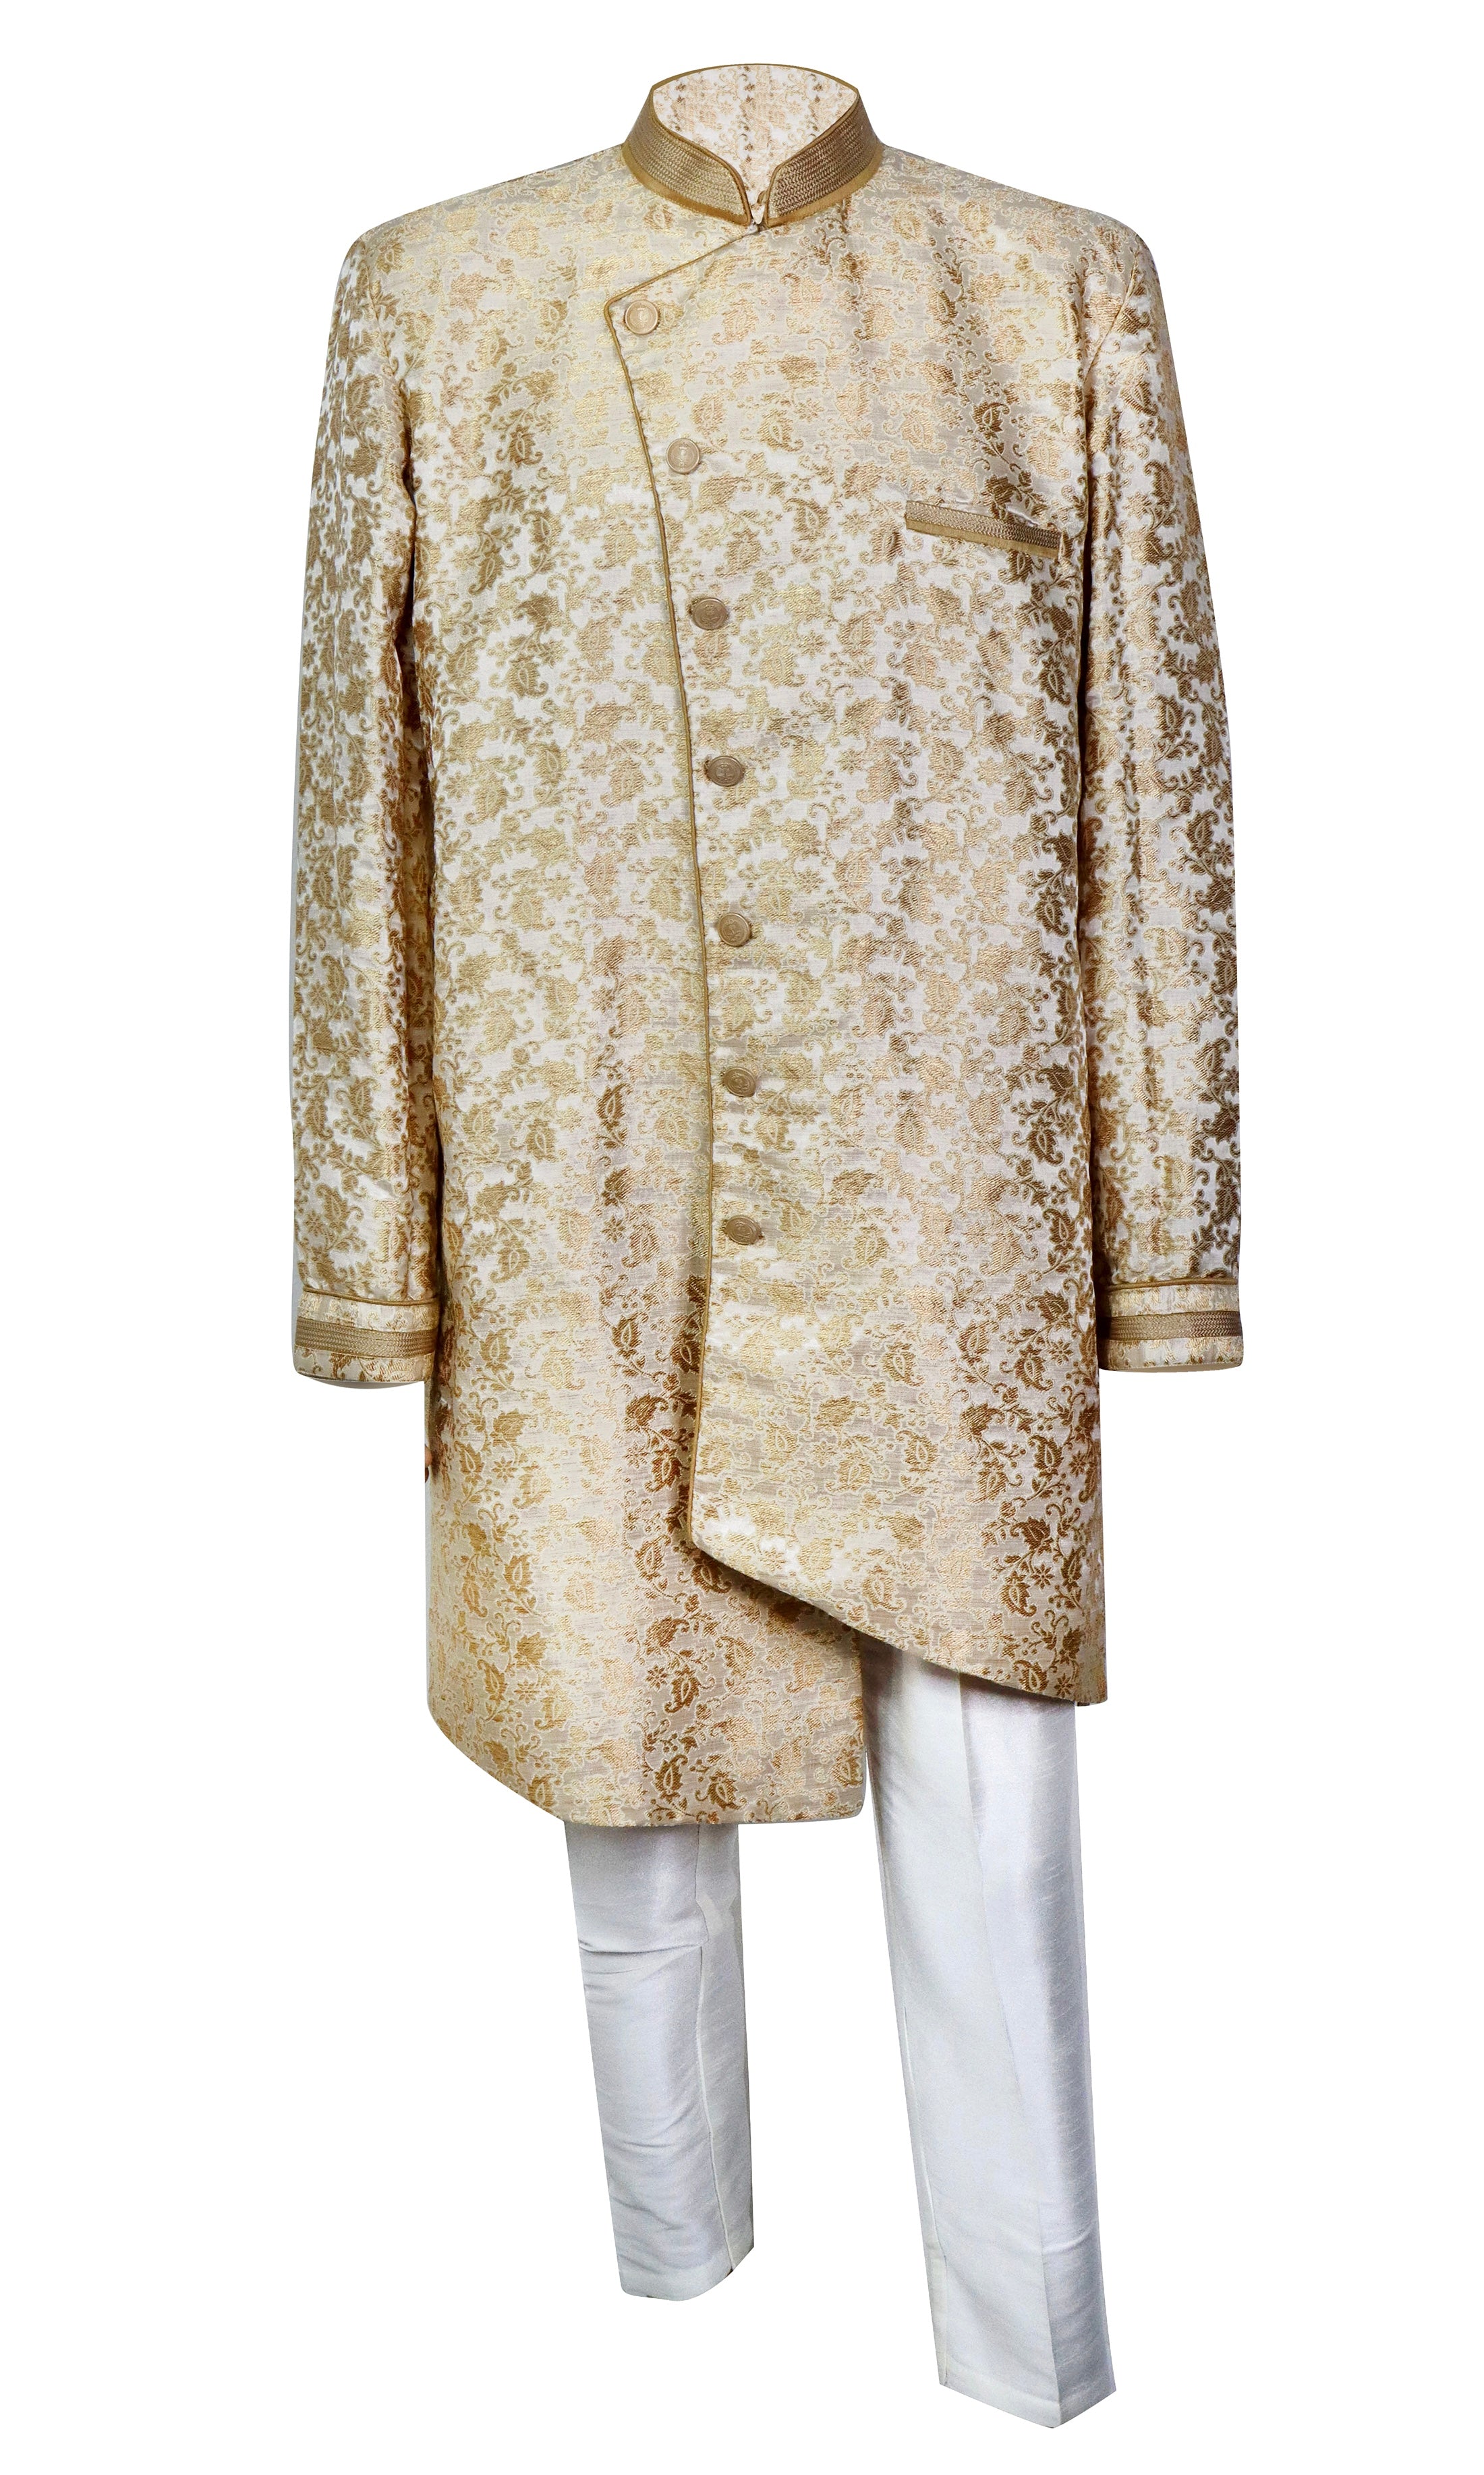 Gold indo-western sherwani with asymmetrical buttons & matchiing white pants